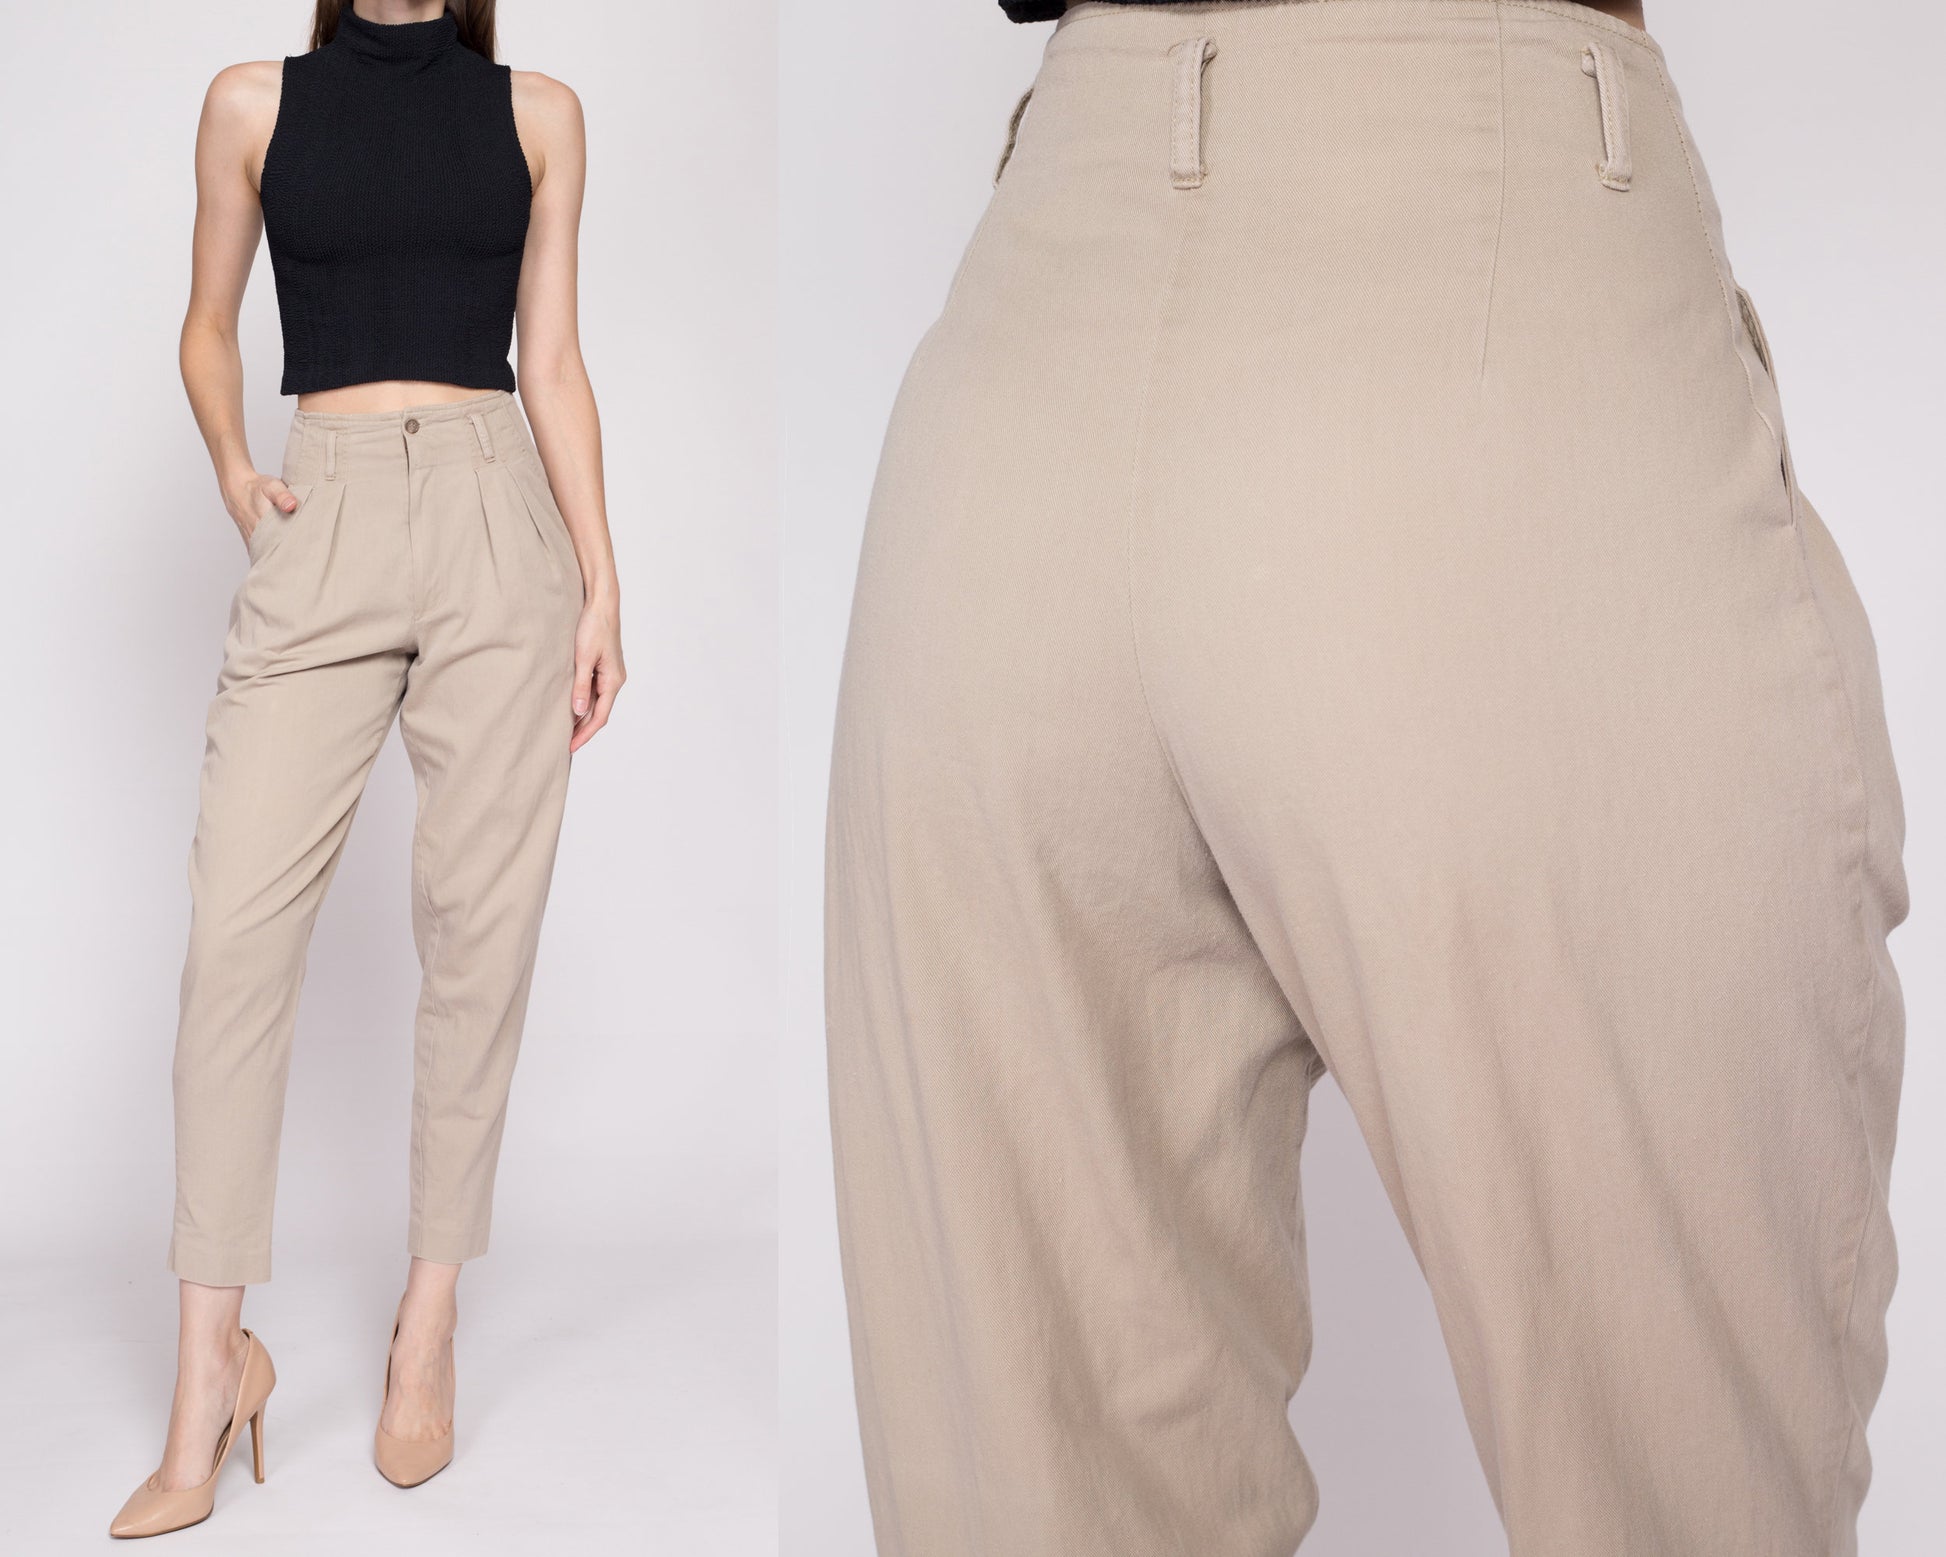 XS| 80s Khaki Cotton High Waisted Pants - Extra Small, 24.5" | Vintage Pleated Tapered Leg Short Inseam Trousers